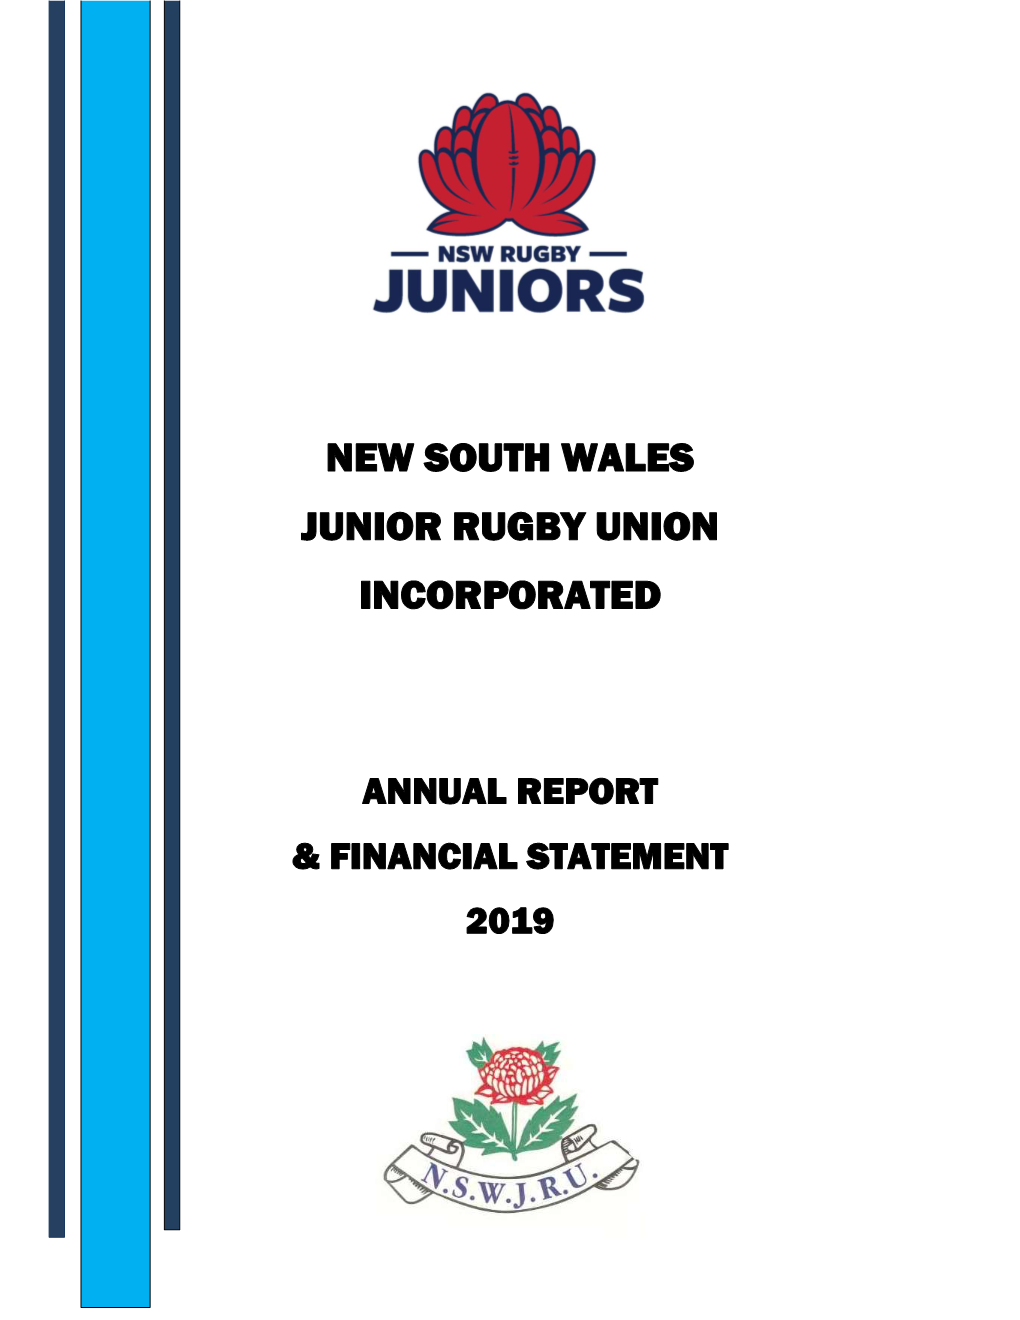 NSW JUNIOR RUGBY UNION NSWRU, Banks Ave., Daceyville